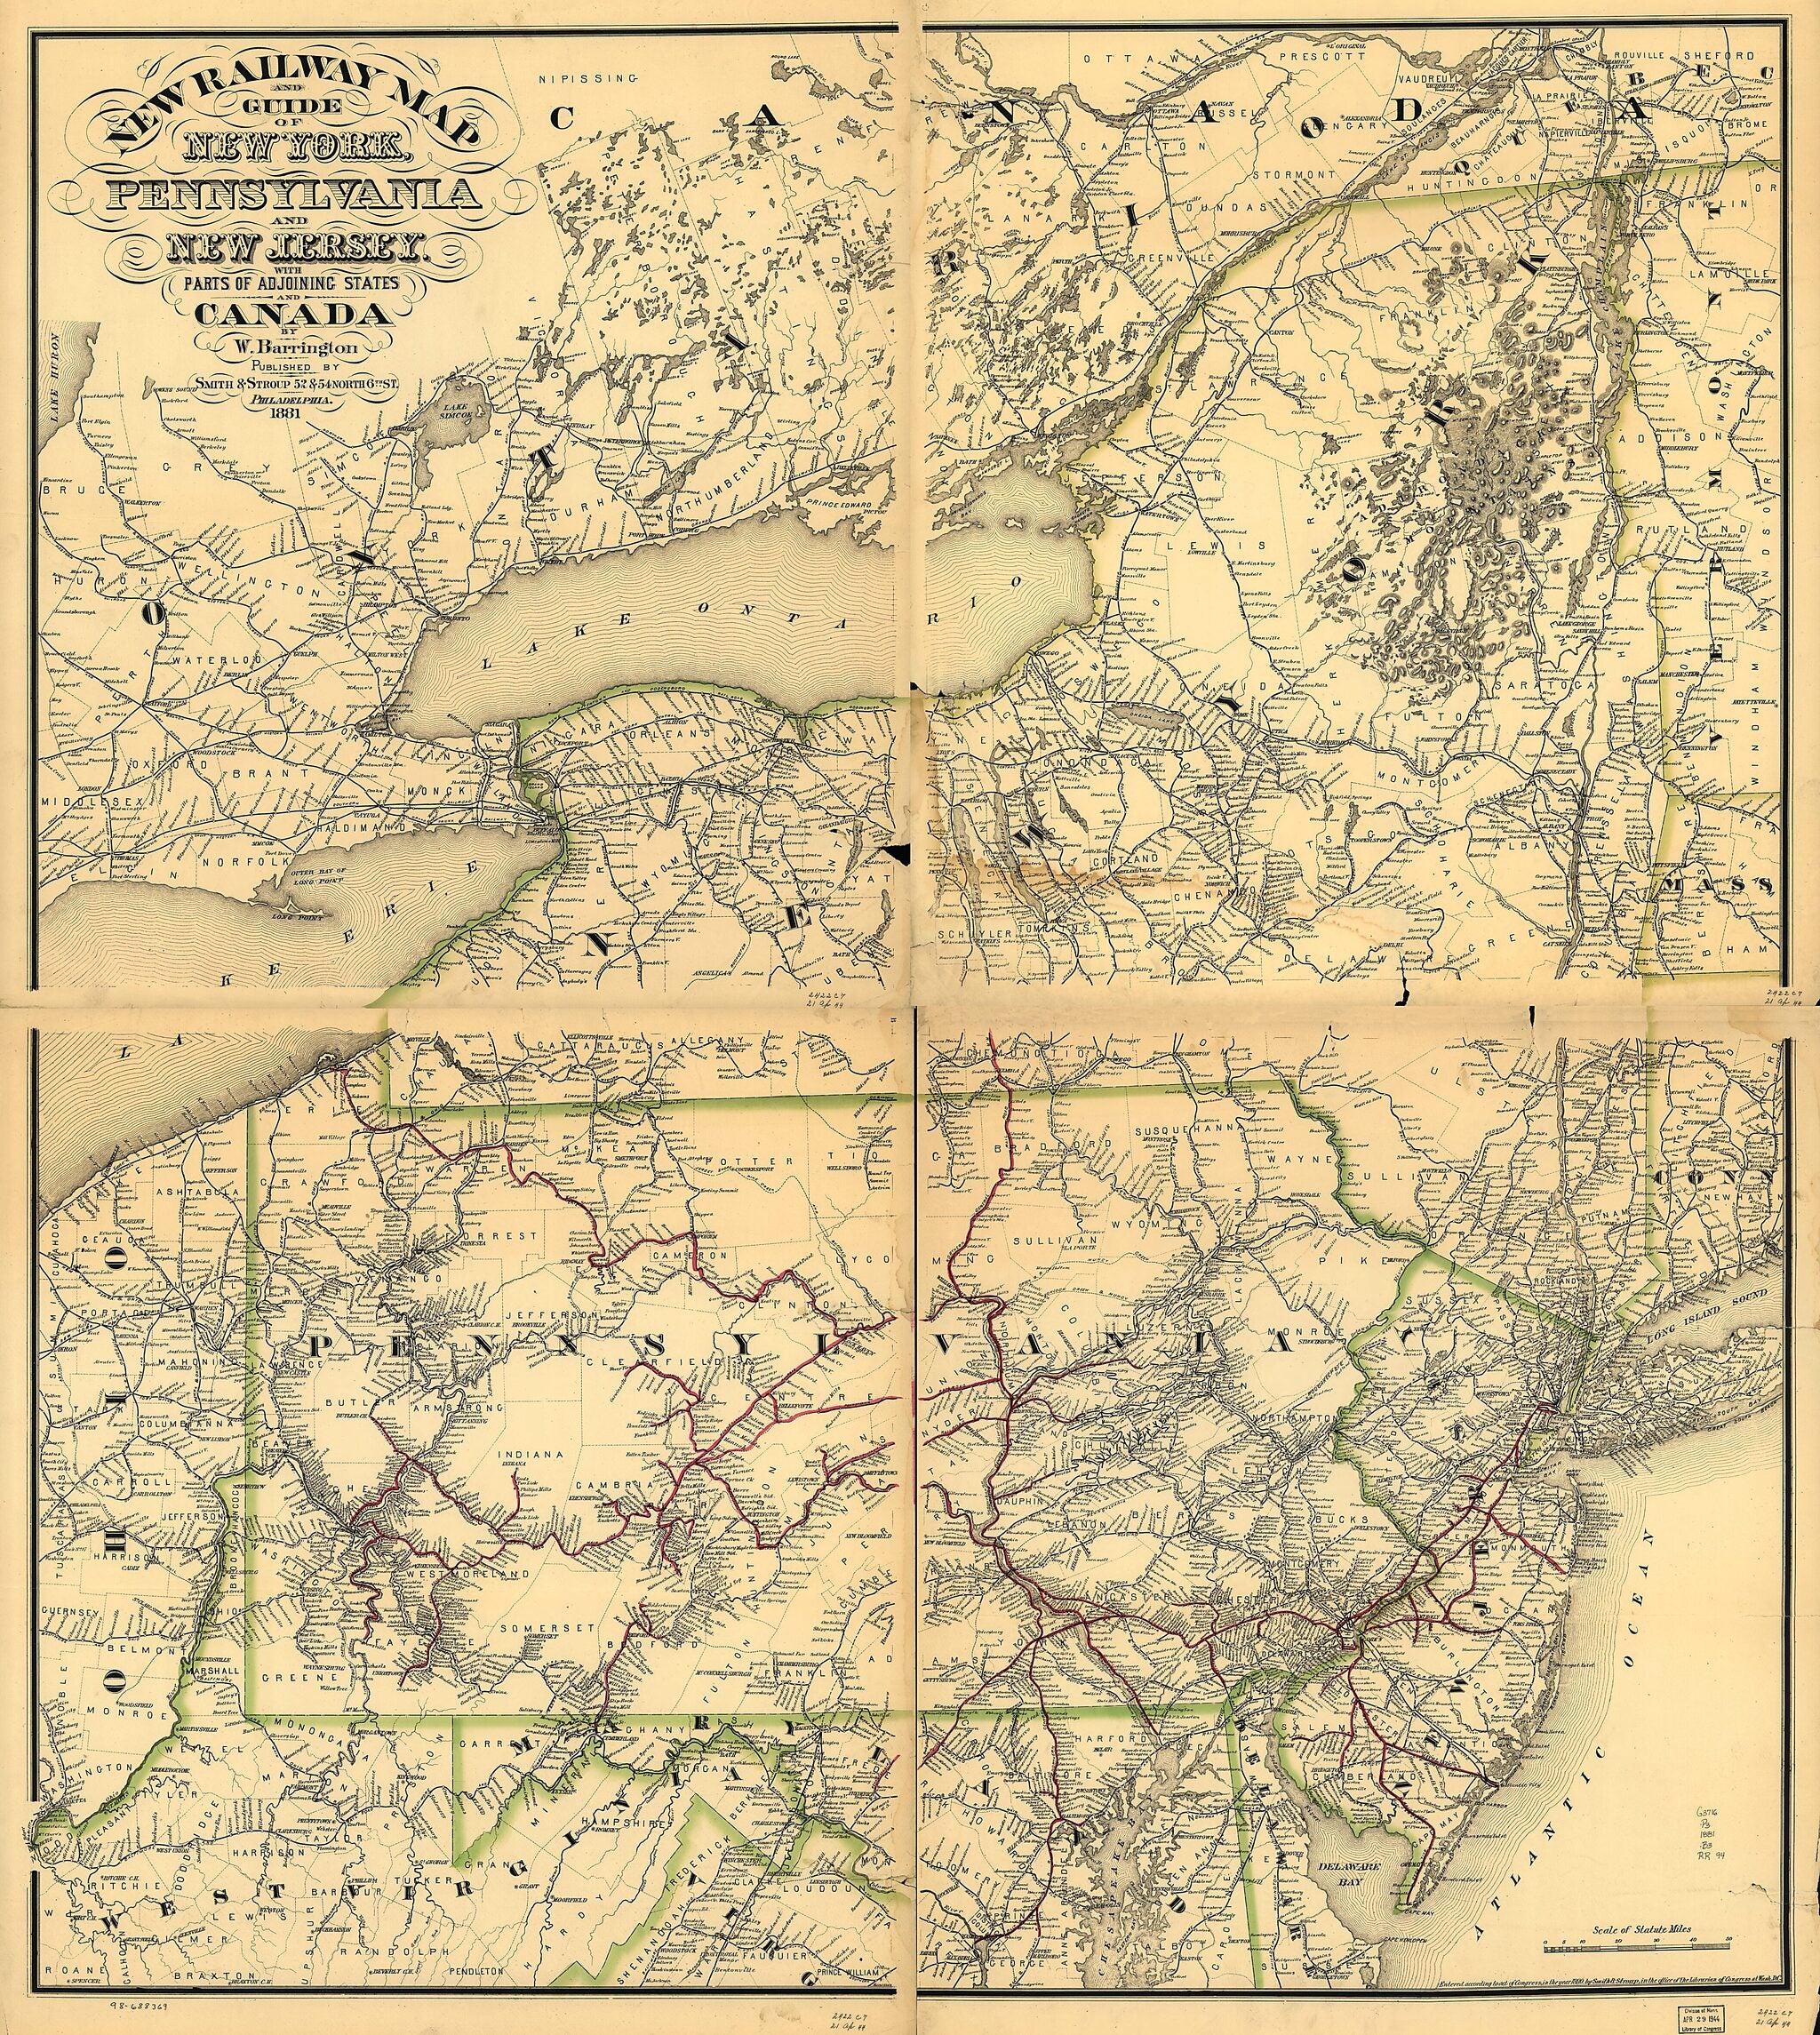 This old map of New Railway Map and Guide of New York, Pennsylvania and New Jersey With Parts of Adjoining States and Canada, from 1881 was created by W. Barrington in 1881